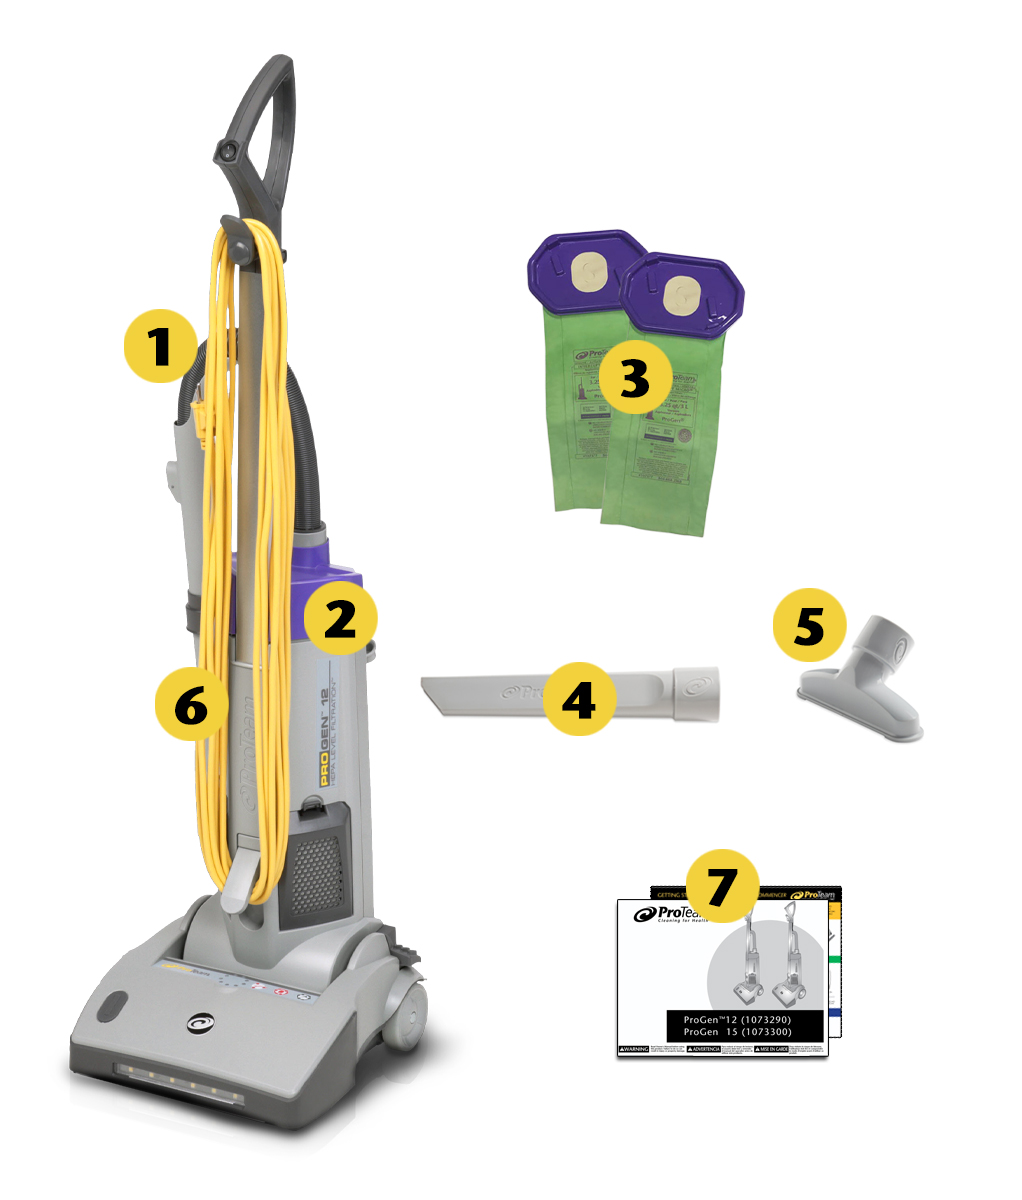 what is included in the box of ProTeam ProGen 12  Upright Vacuum